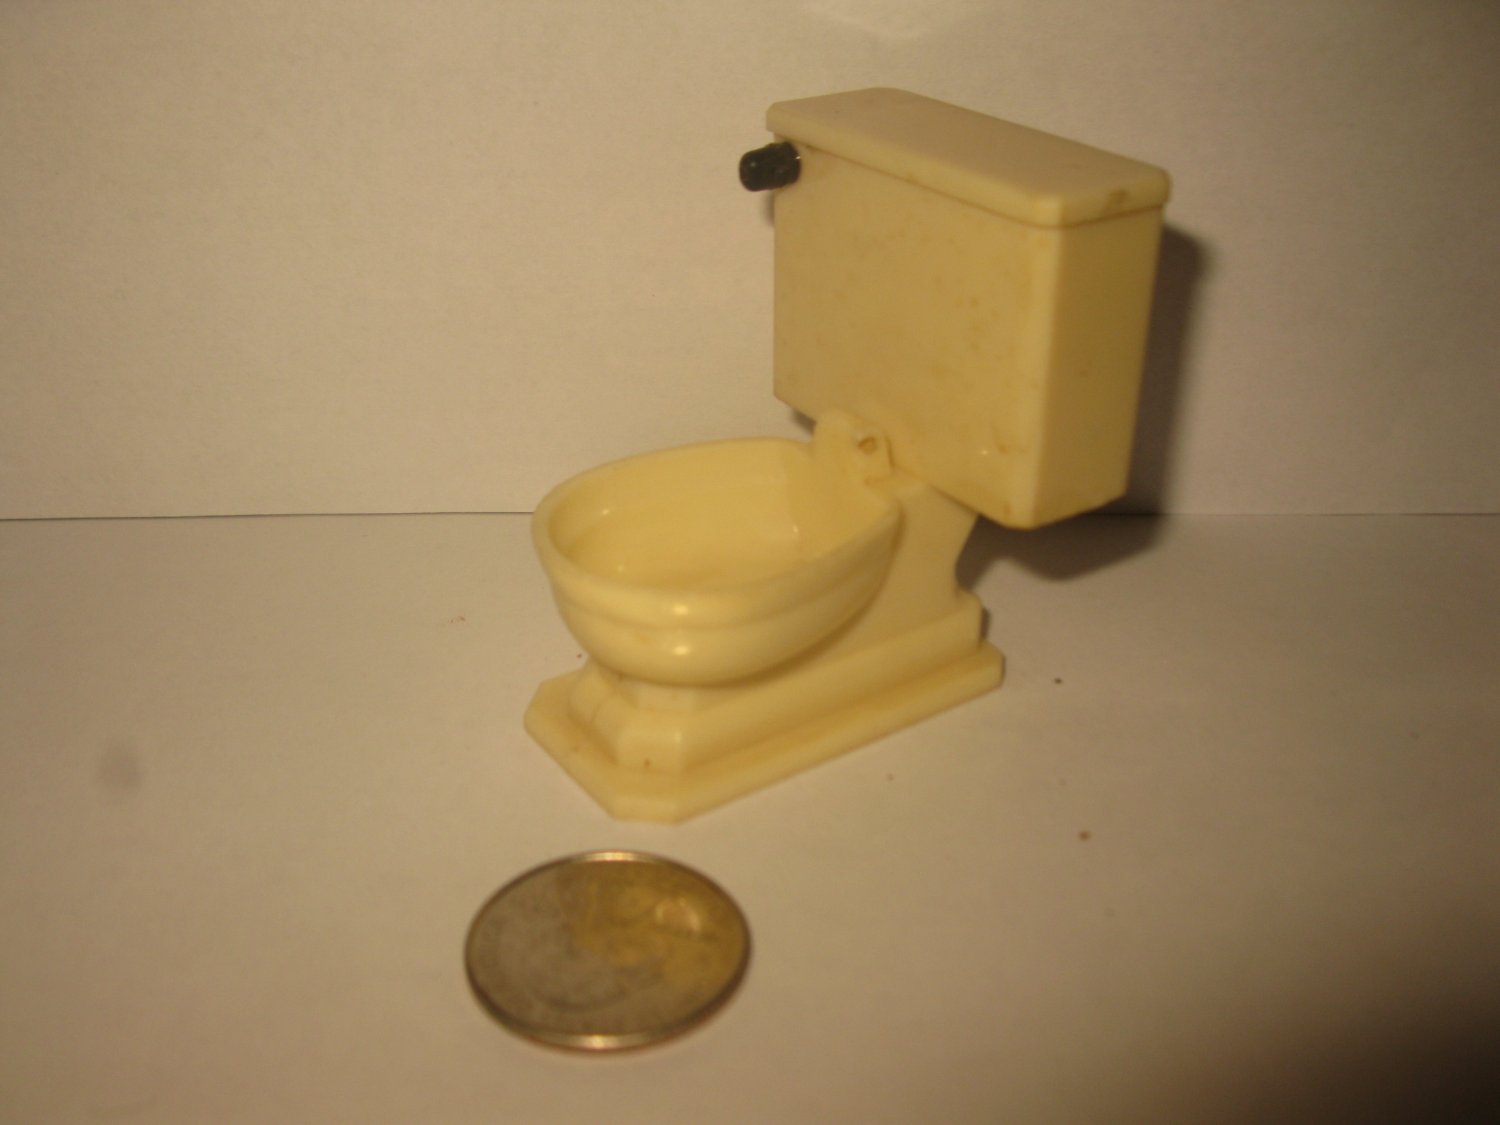 (DH-1) Doll House Miniature: Renwal Toilet - Missing Lid